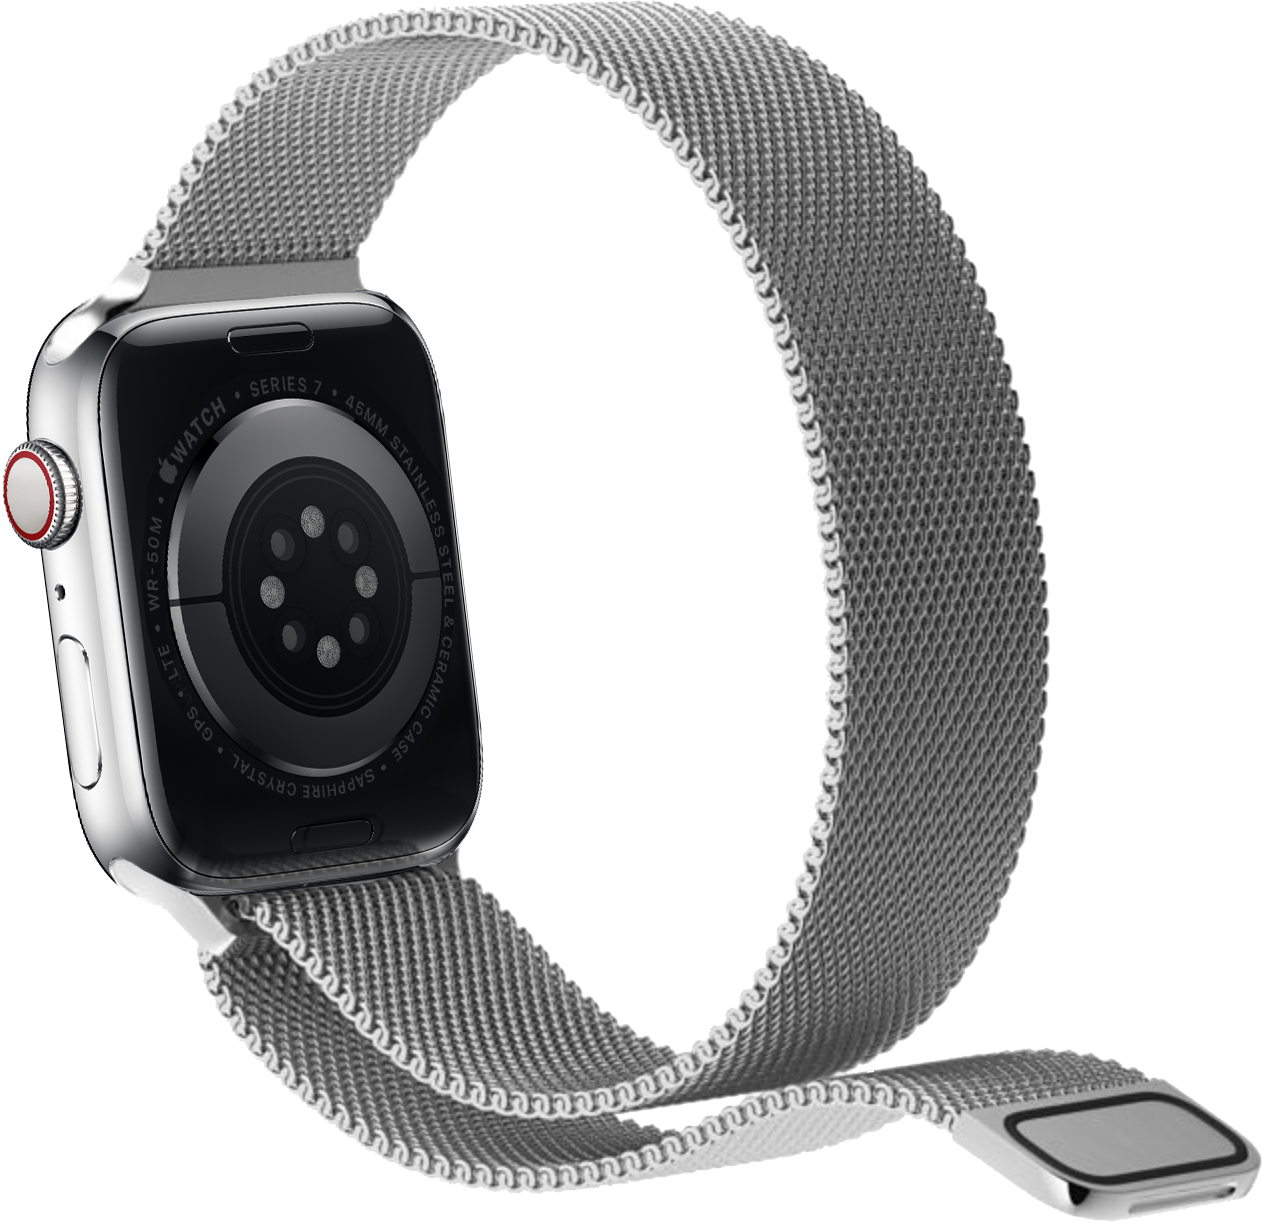 Apple Watch with Milanese Loop band